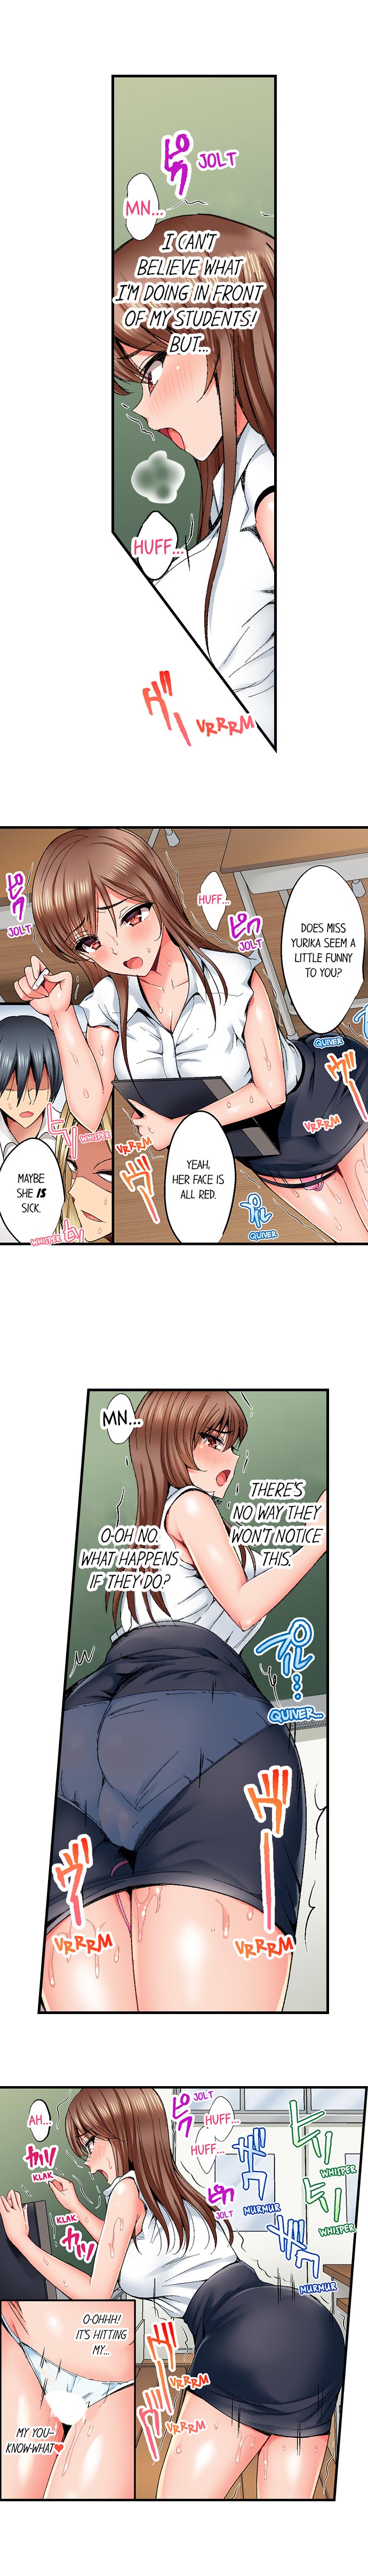 Netorare My Teacher With My Friends - Chapter 7 Page 6